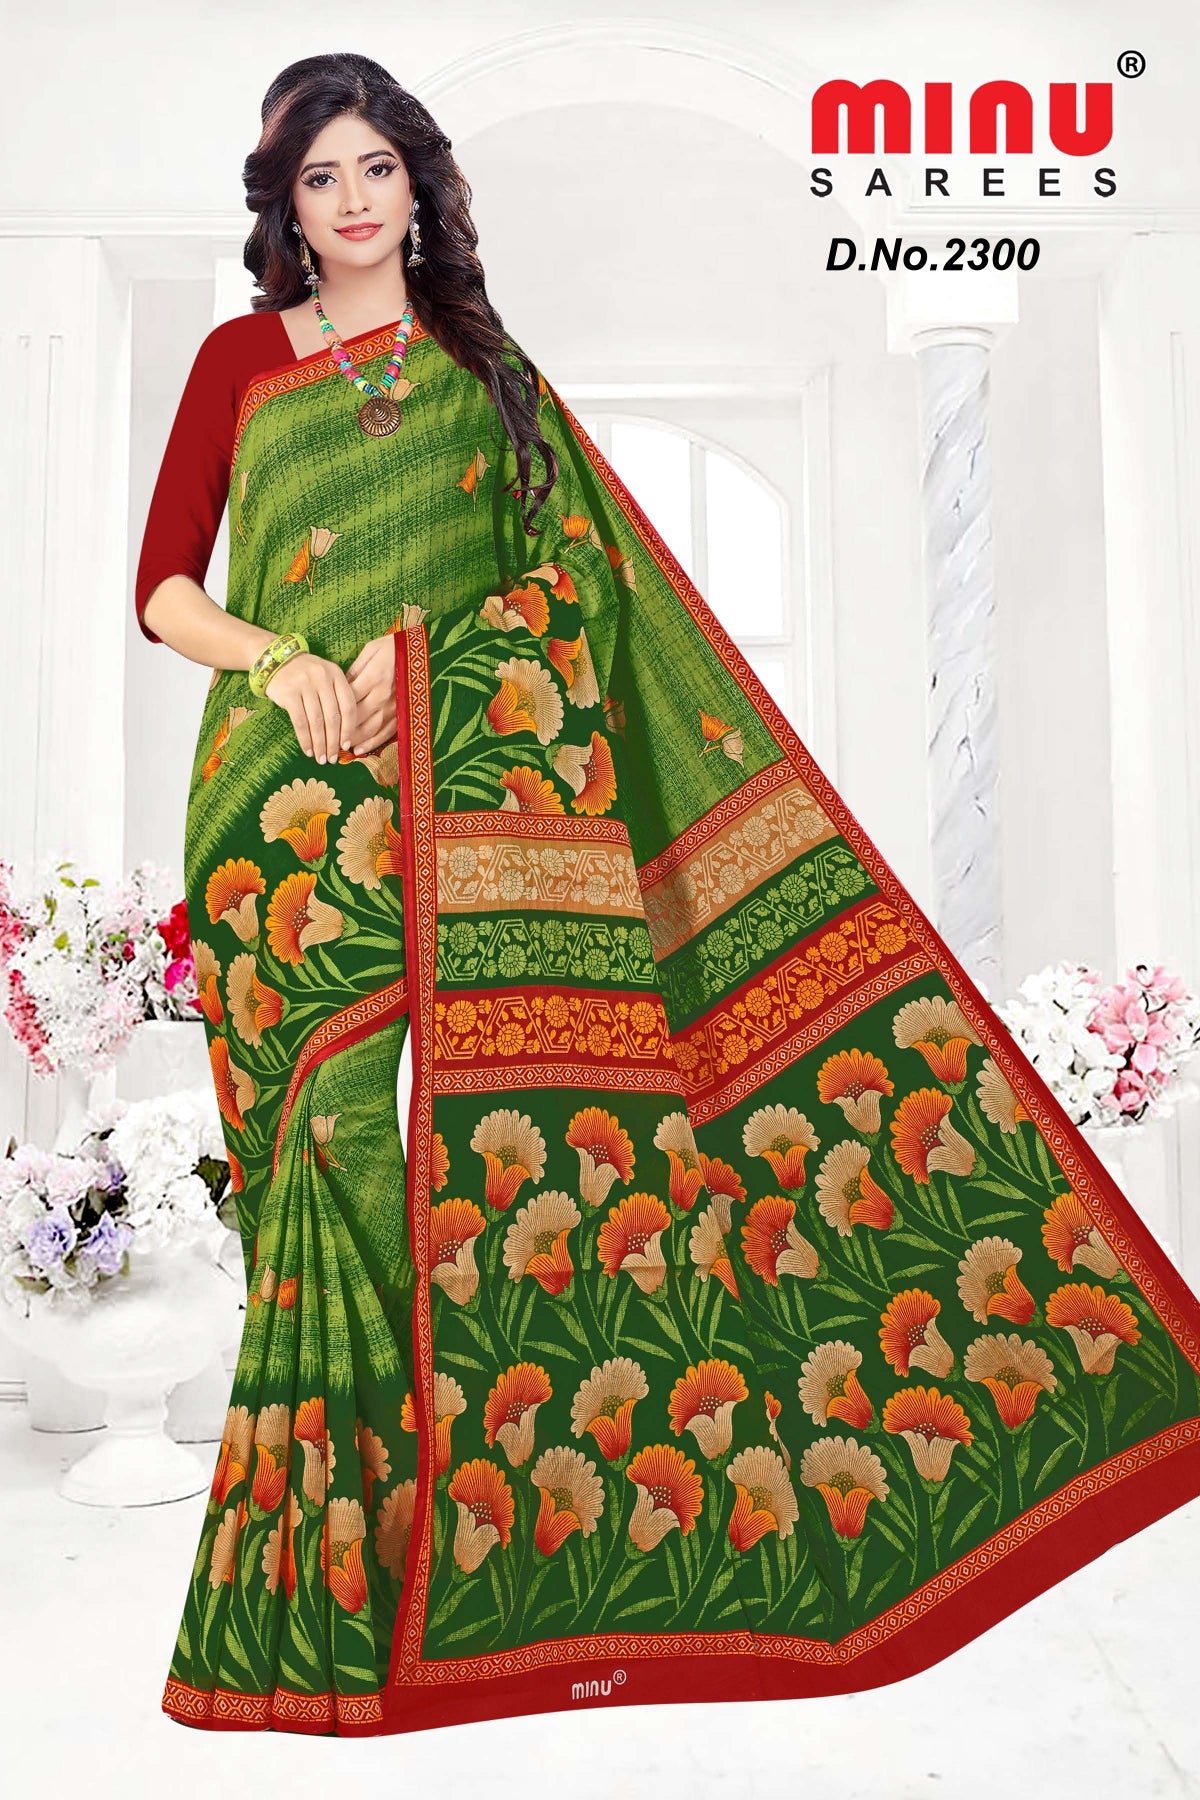 Women's printed saree for wholesale online